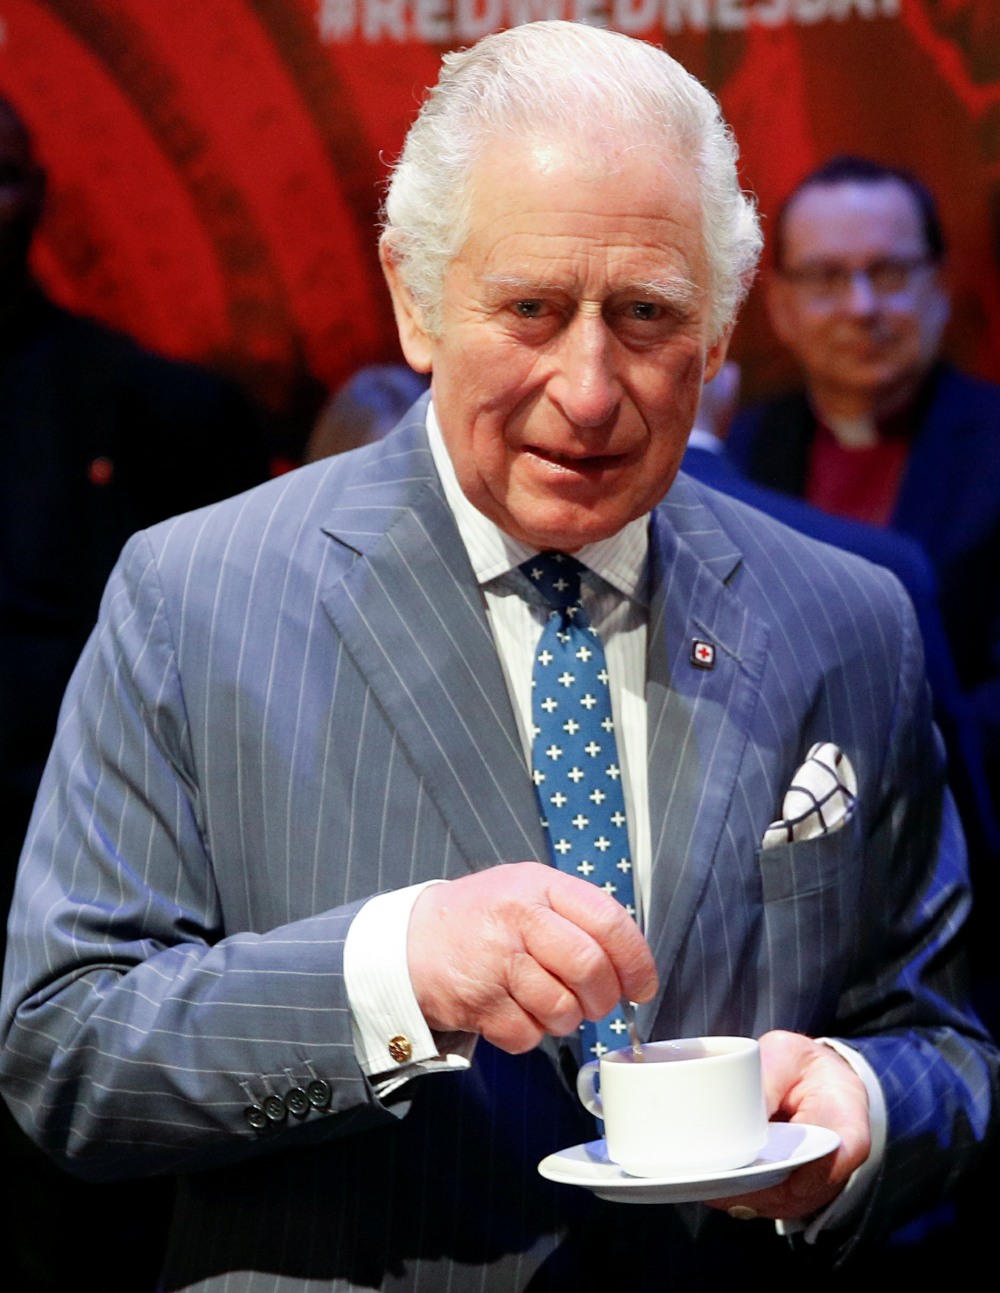 Britain's Prince Charles attends an advent service at Holy Trinity Brompton church in London